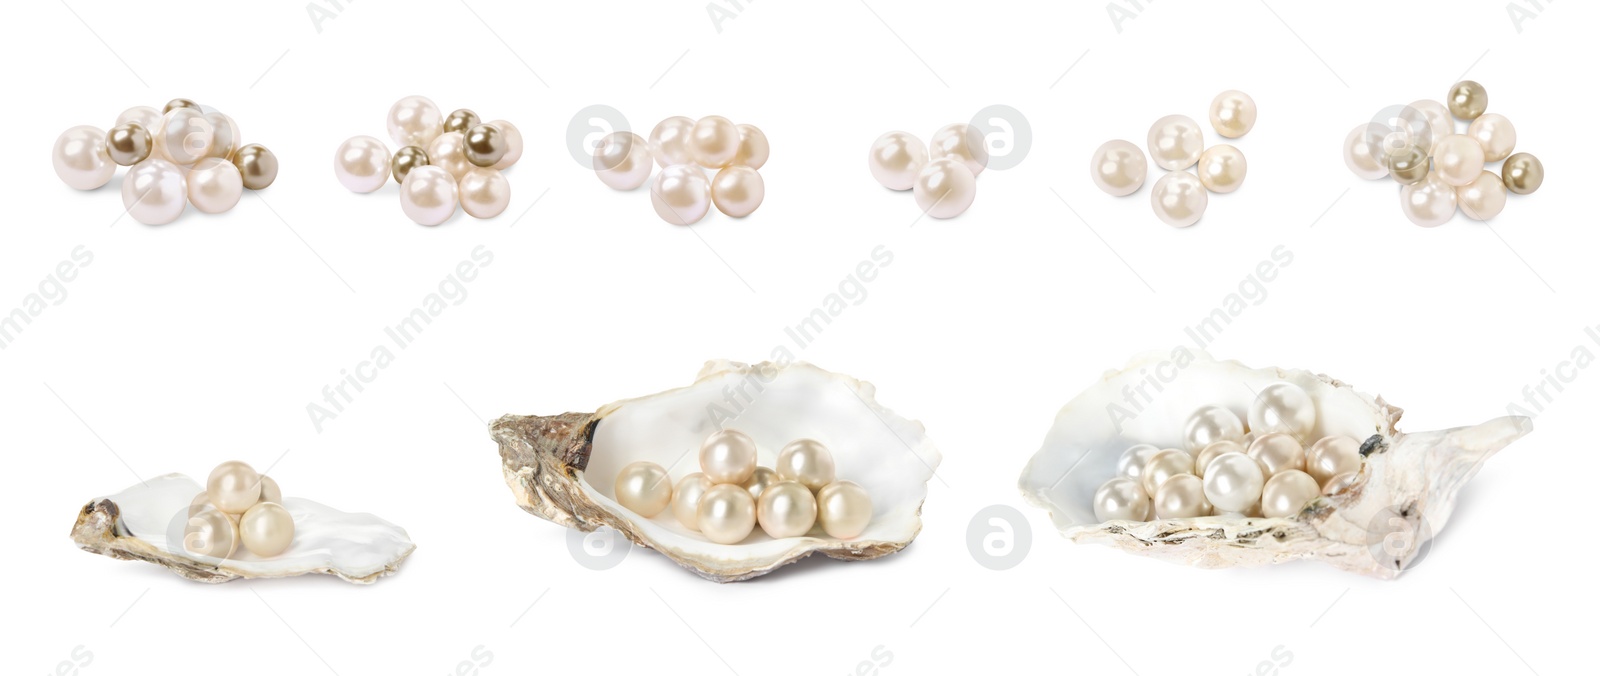 Image of Set with beautiful pearls and oyster shells on white background. Banner design